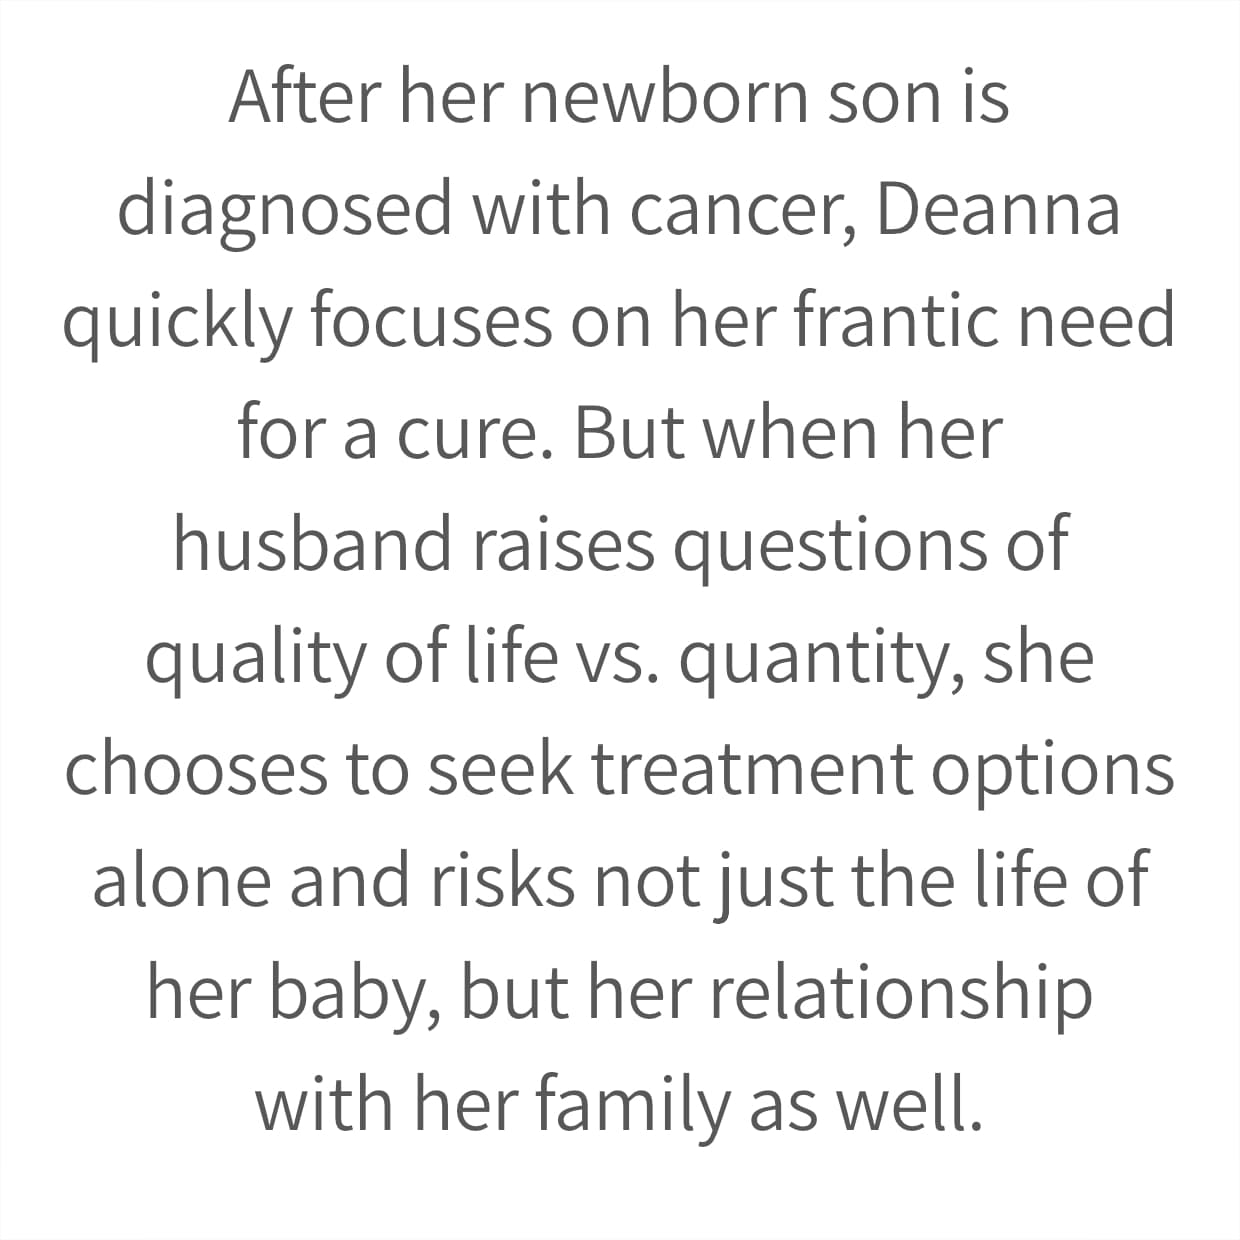 After her newborn son is diagnosed with cancer, Deanna quickly focuses on her frantic need for a cure. But when her husband raises questions of quality of life vs. quantity, she chooses to seek treatment options alone and risks not just the life of her baby, but her relationship with her family as well.